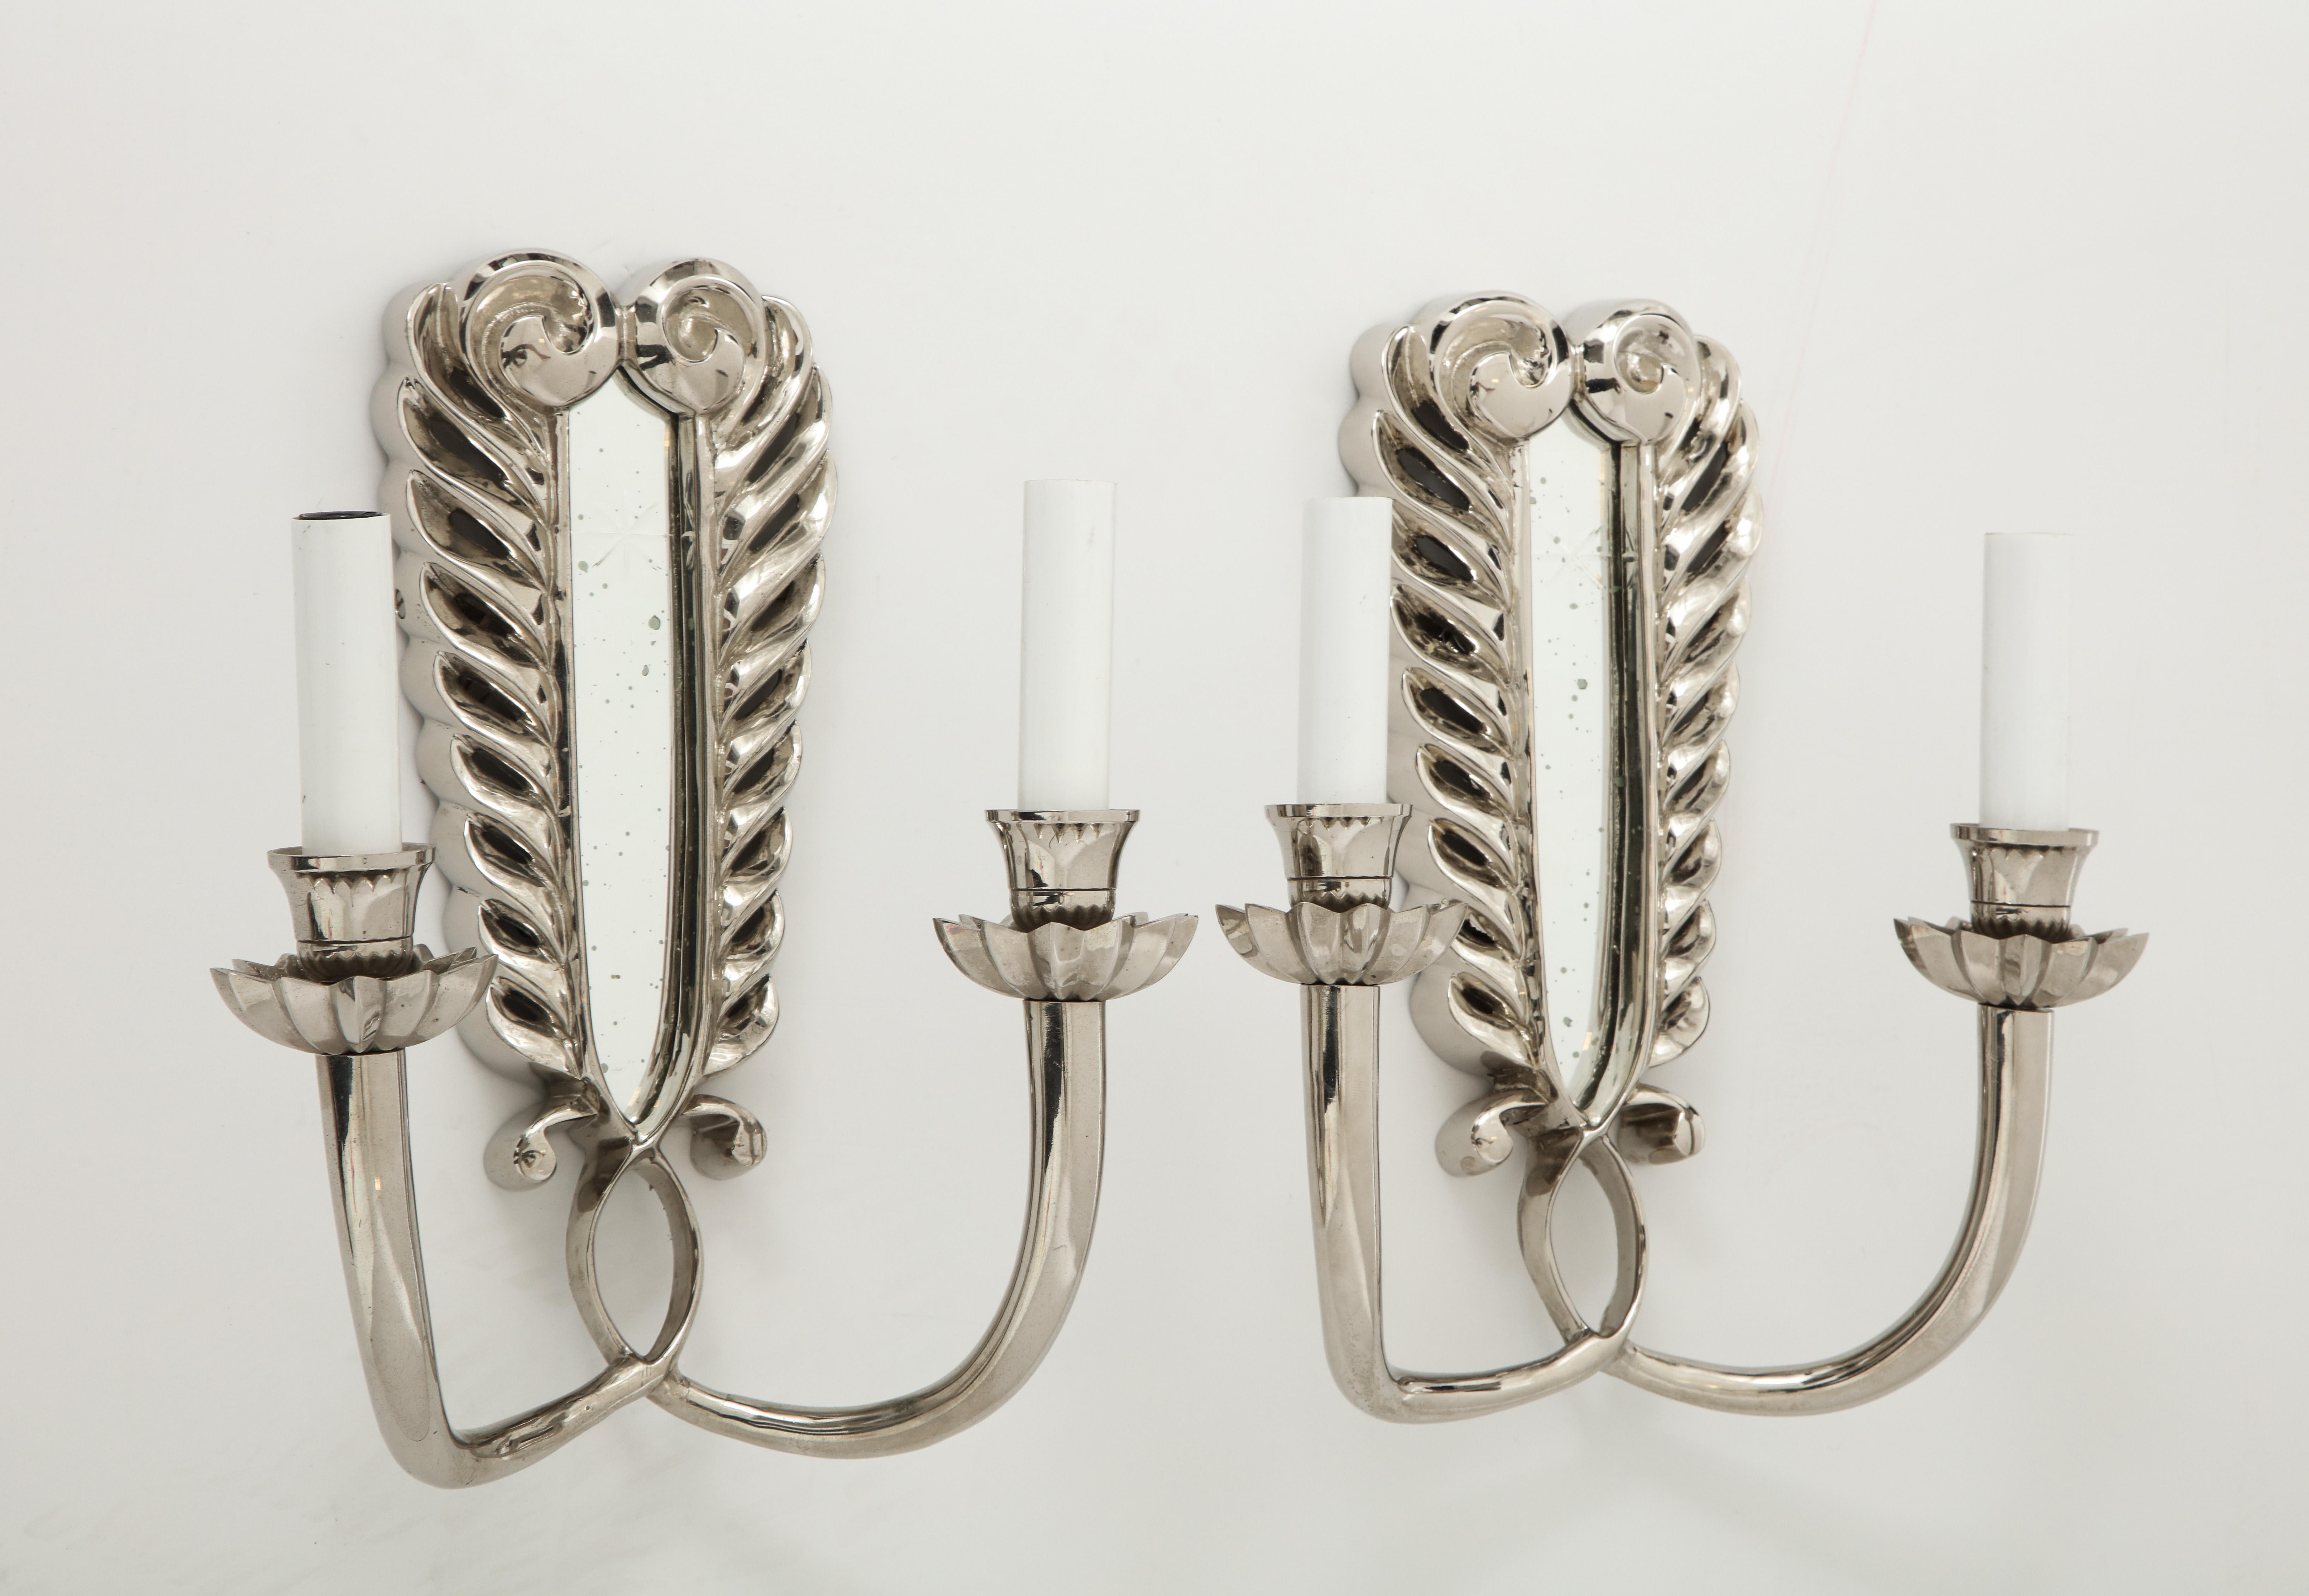 A pair of polished nickel double arm sconces with a mirrored back plate, surrounded by a scrolling design. The bobeche on each arm mimics a flower petal and adds an elegant touch to the frame. Priced at $2800 per pair.